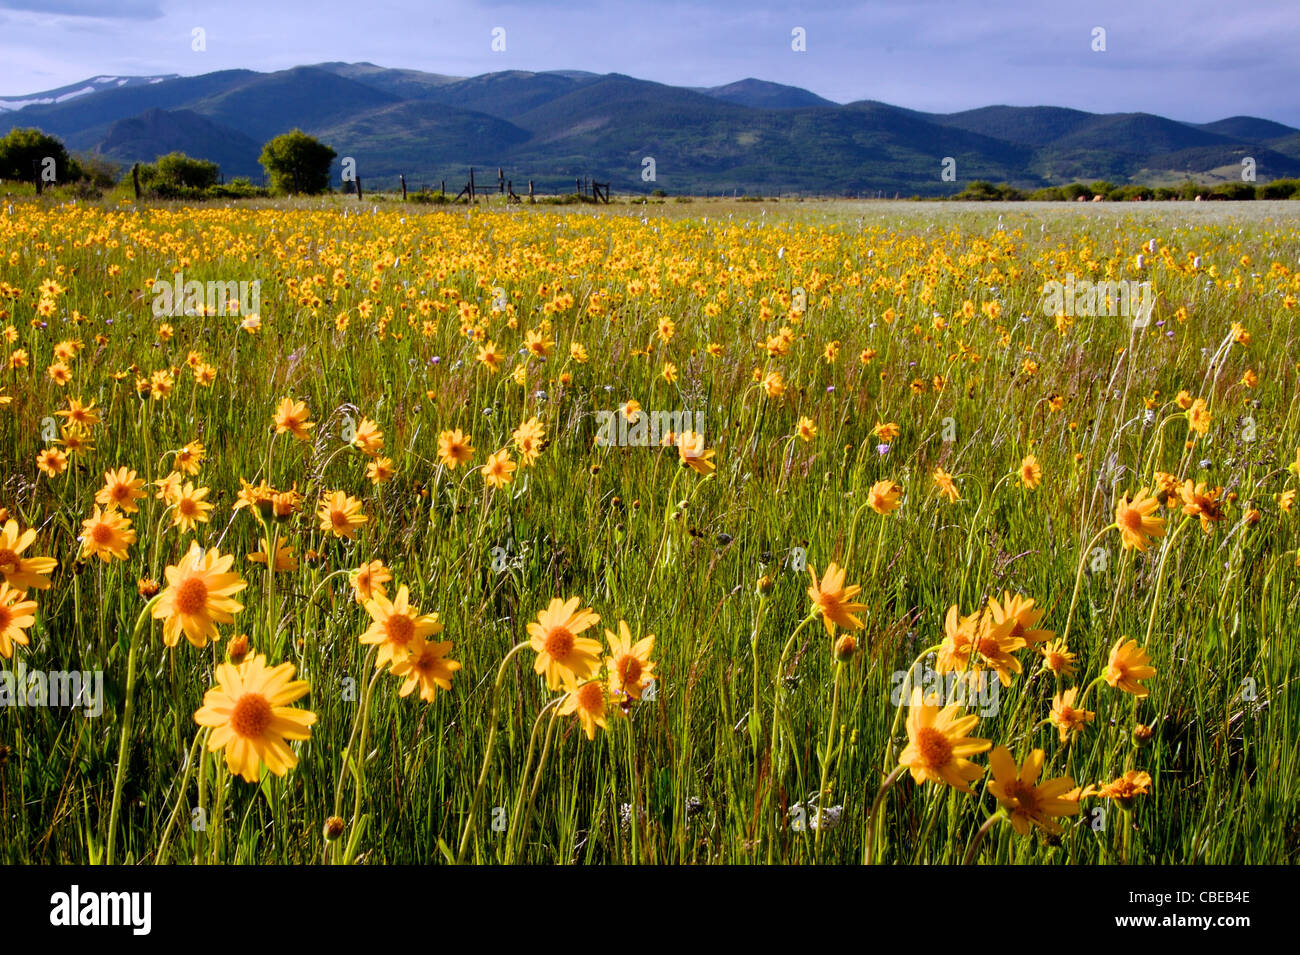 Sunflowers in a mountain meadow Stock Photo